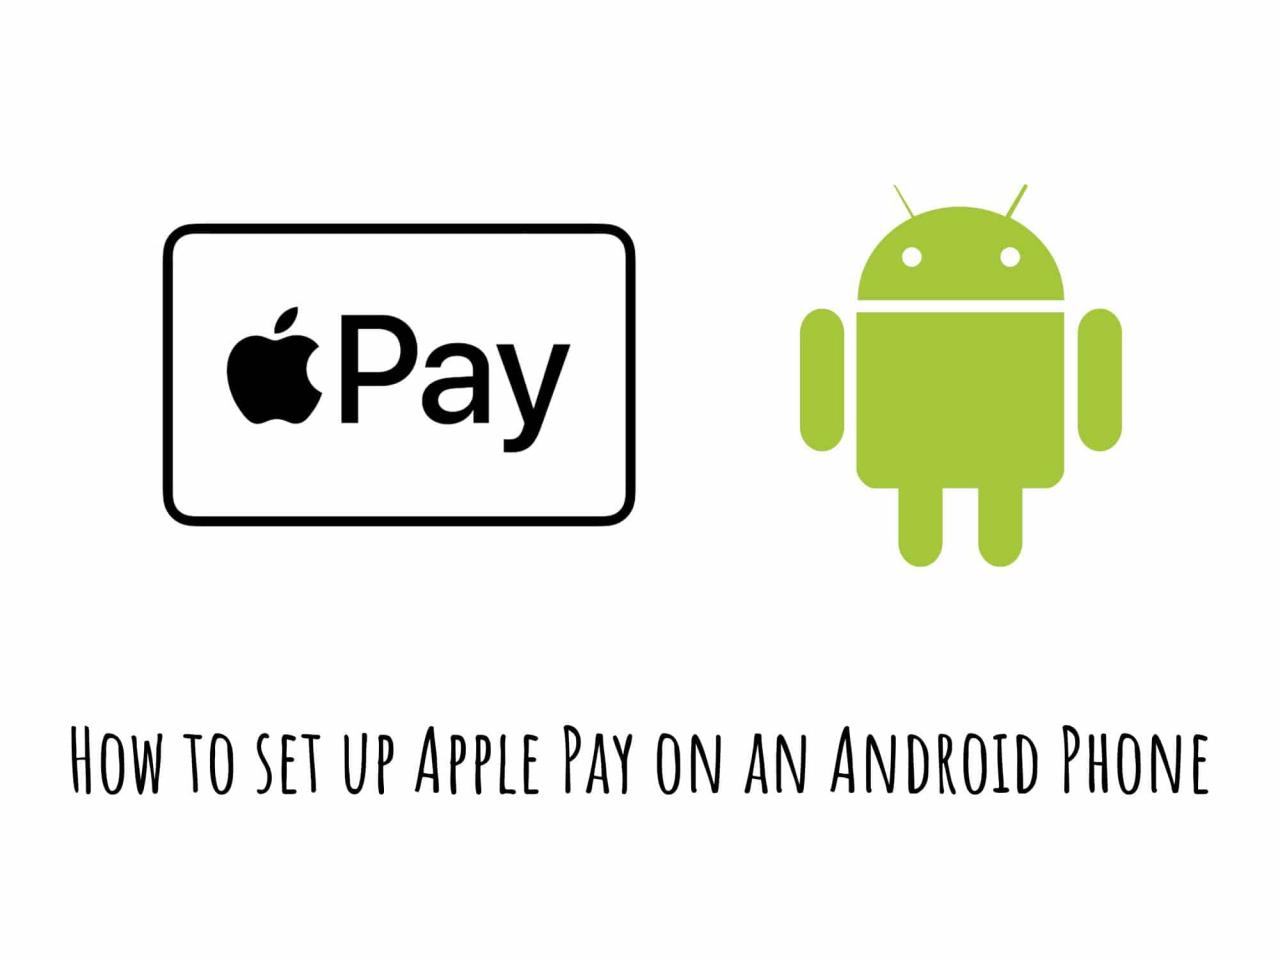 Can i have apple pay without an iphone